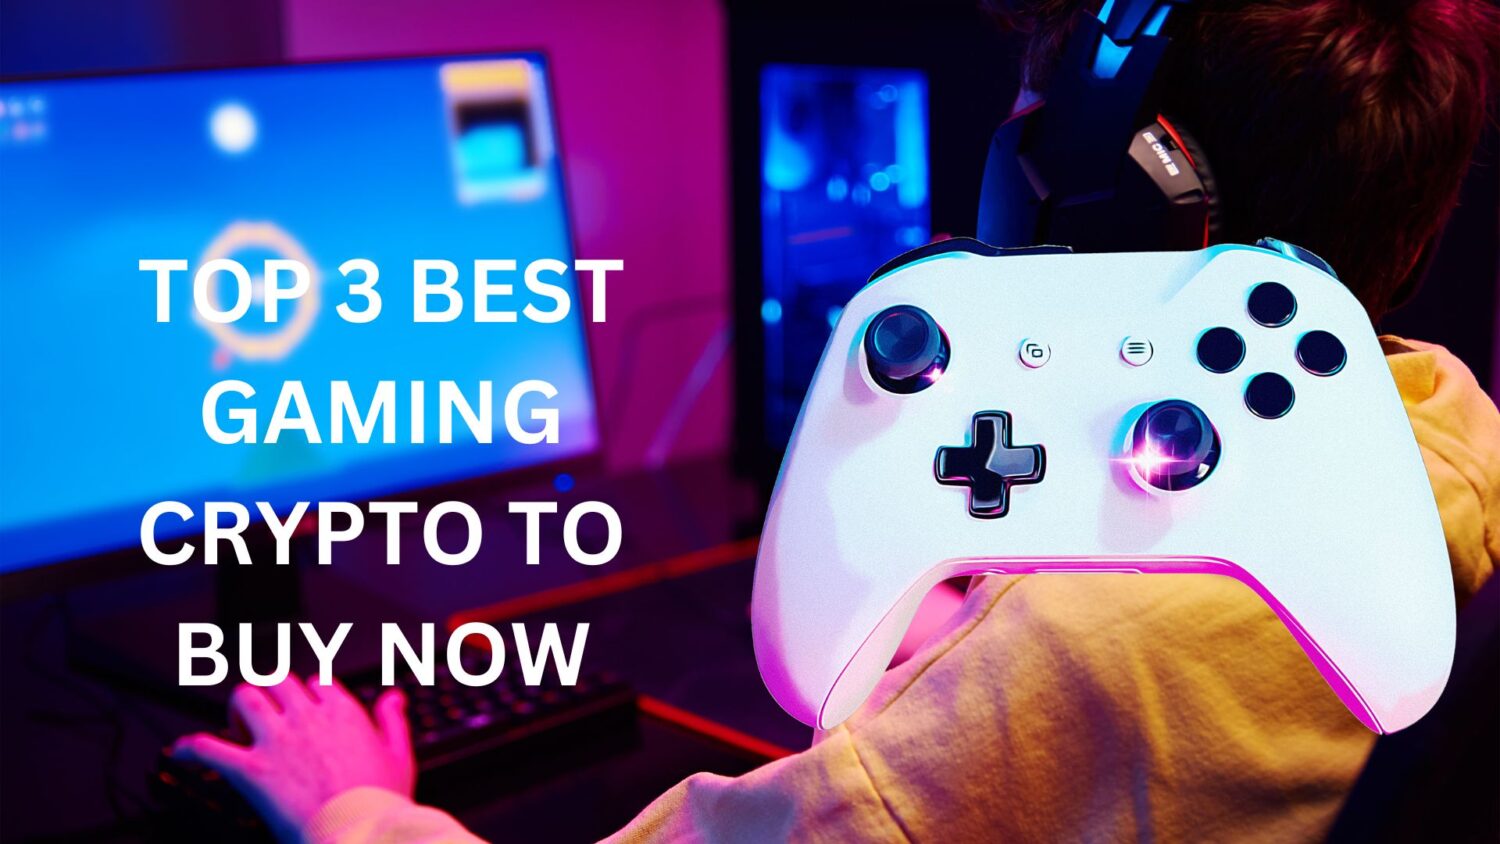 Top 3 Best Gaming Crypto To Buy Now